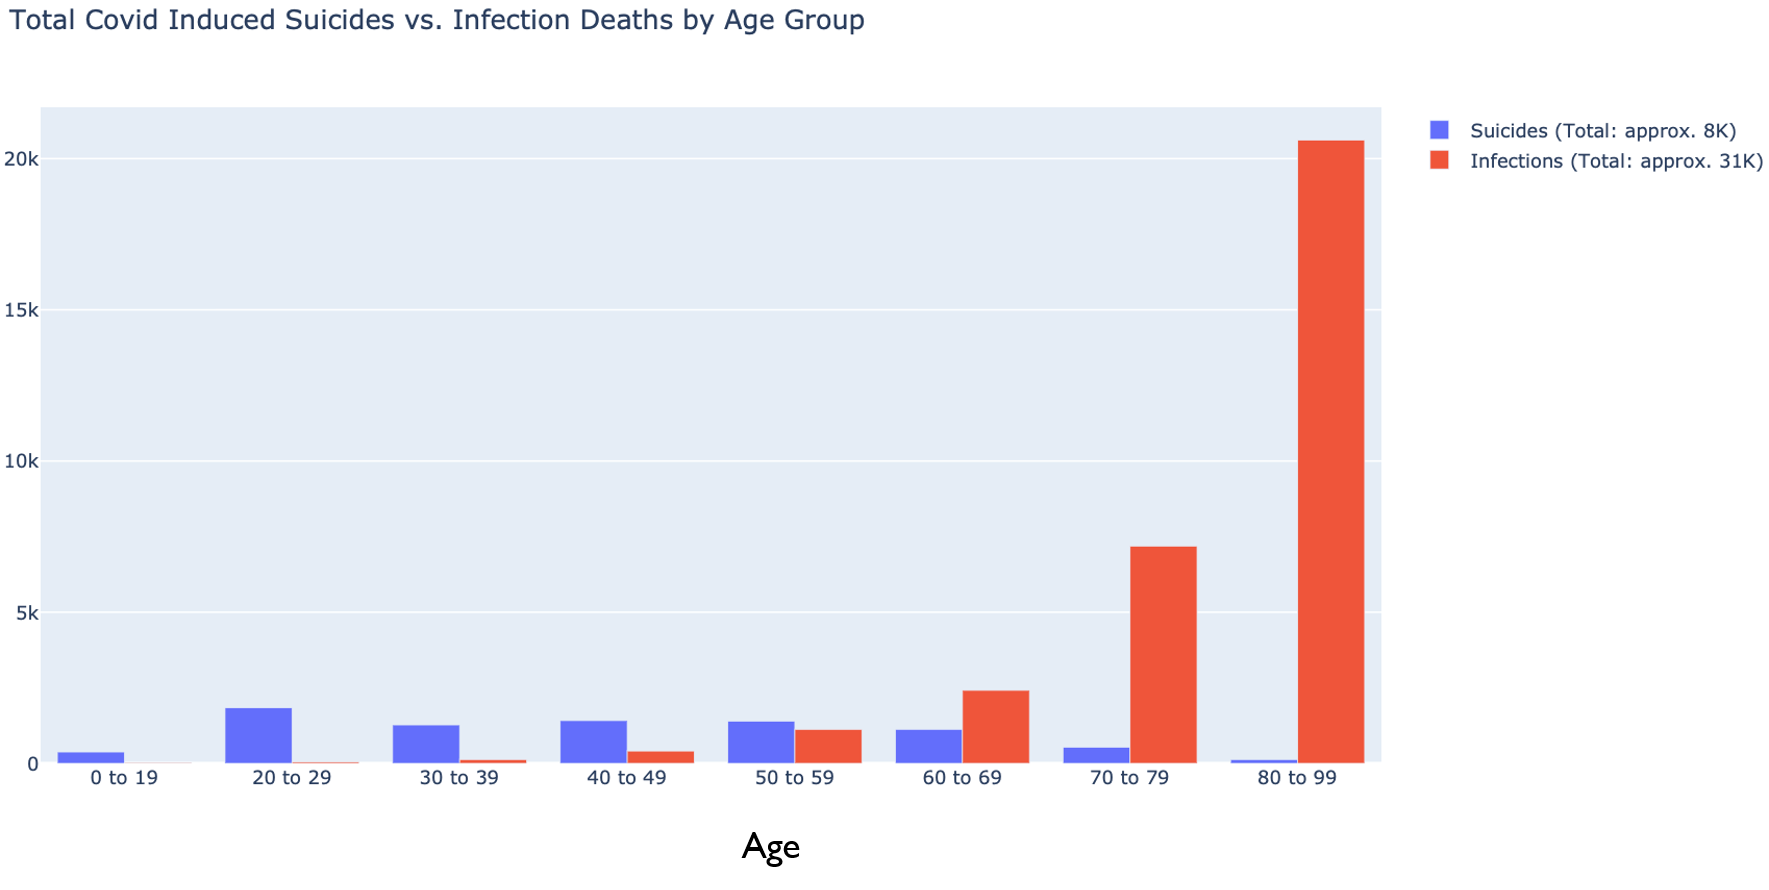 Distribution by age (Compared with deaths due to COVID-19 infections)